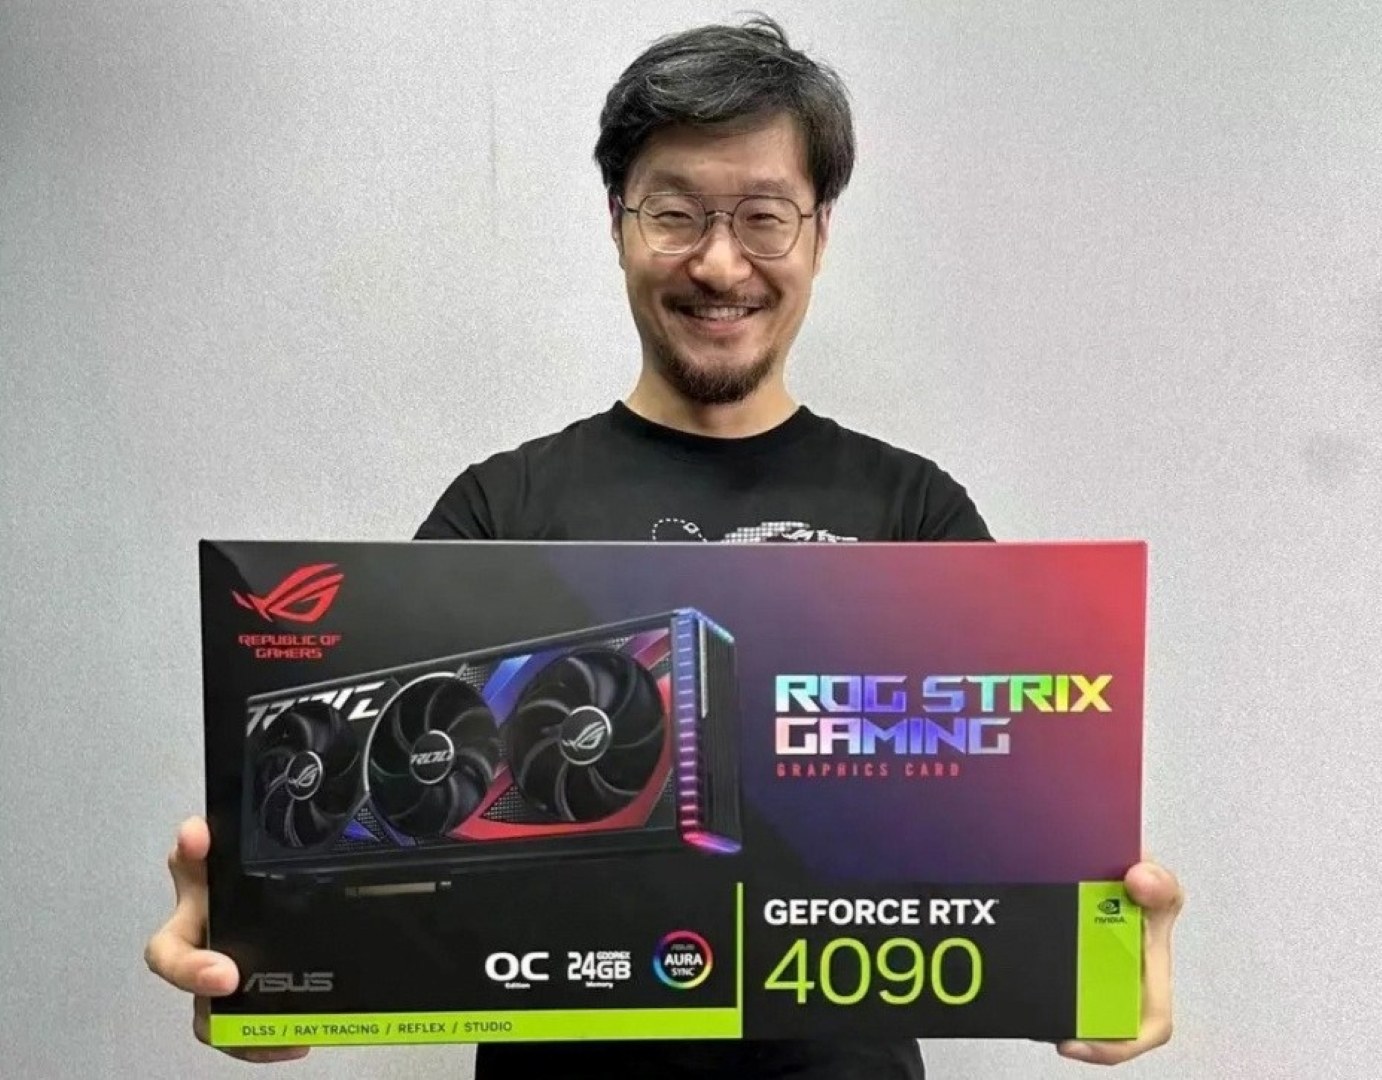 asus-rog-strix-geforce-rtx-4090-retail-box-is-ridiculously-huge